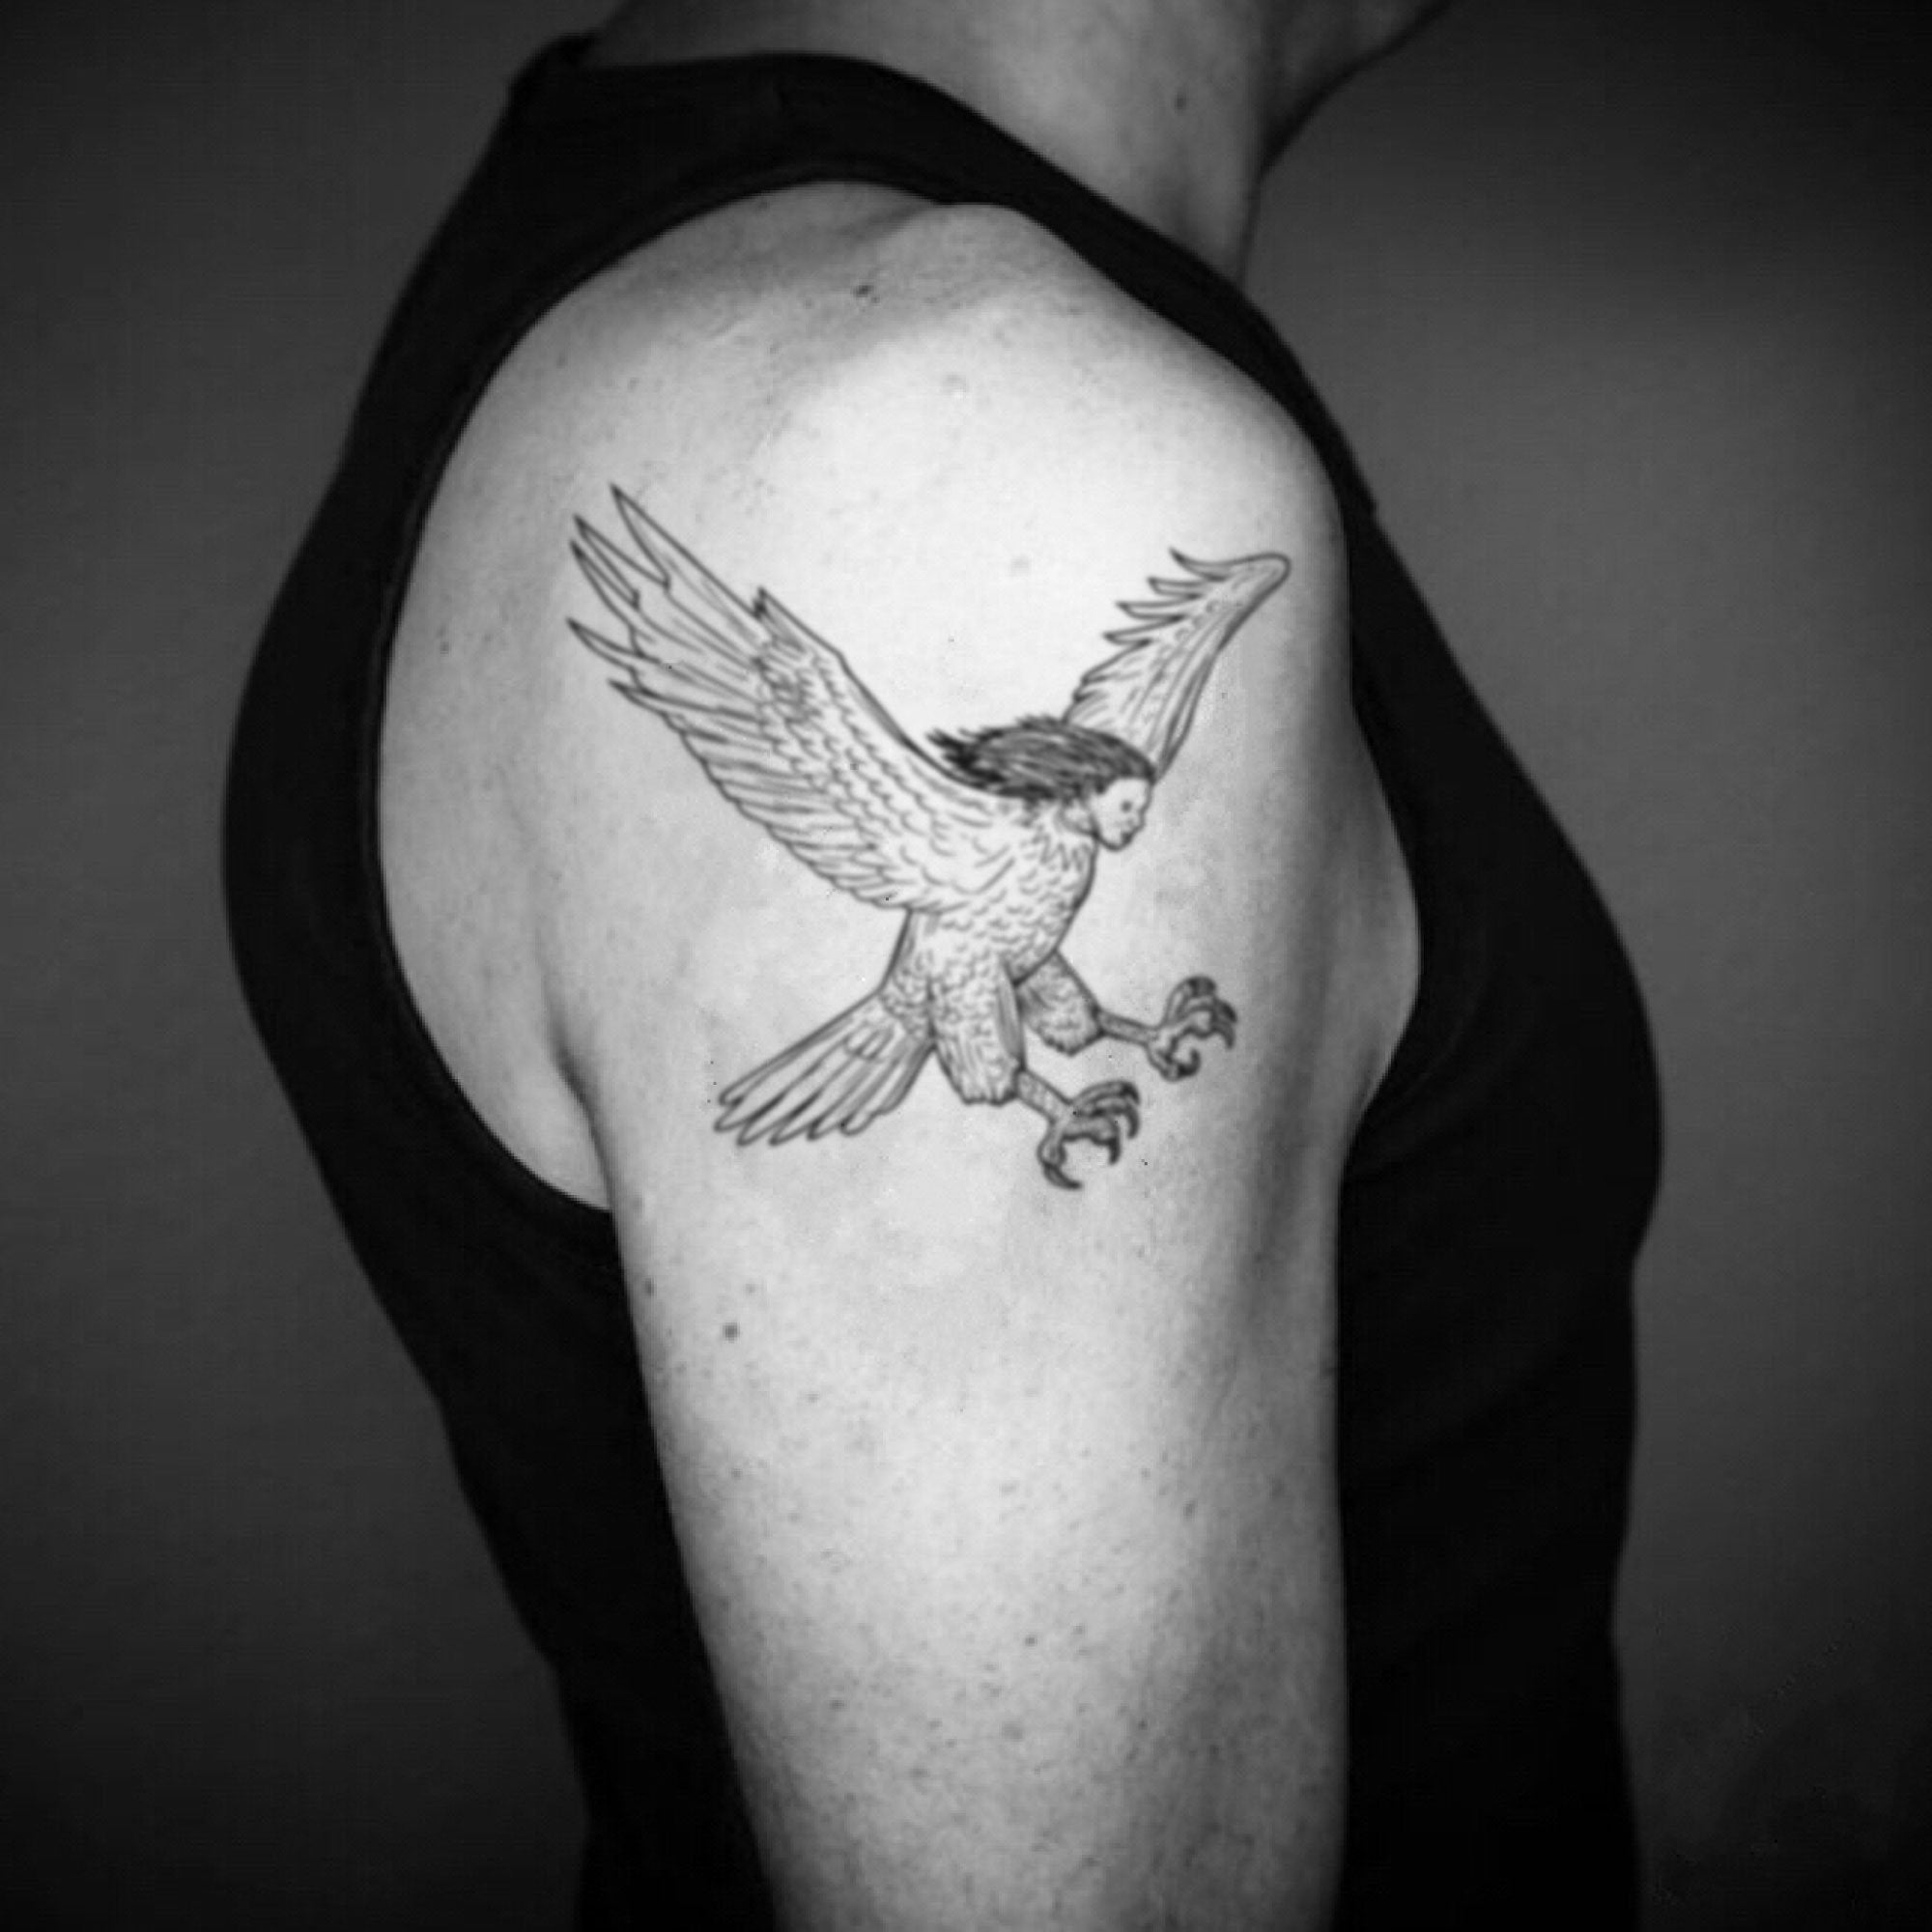 Tony Ritter on Instagram Heres a Harpy eagle from the other day on  ochoatattoo thanks for letting me do this one man Done at chariottattoo  using